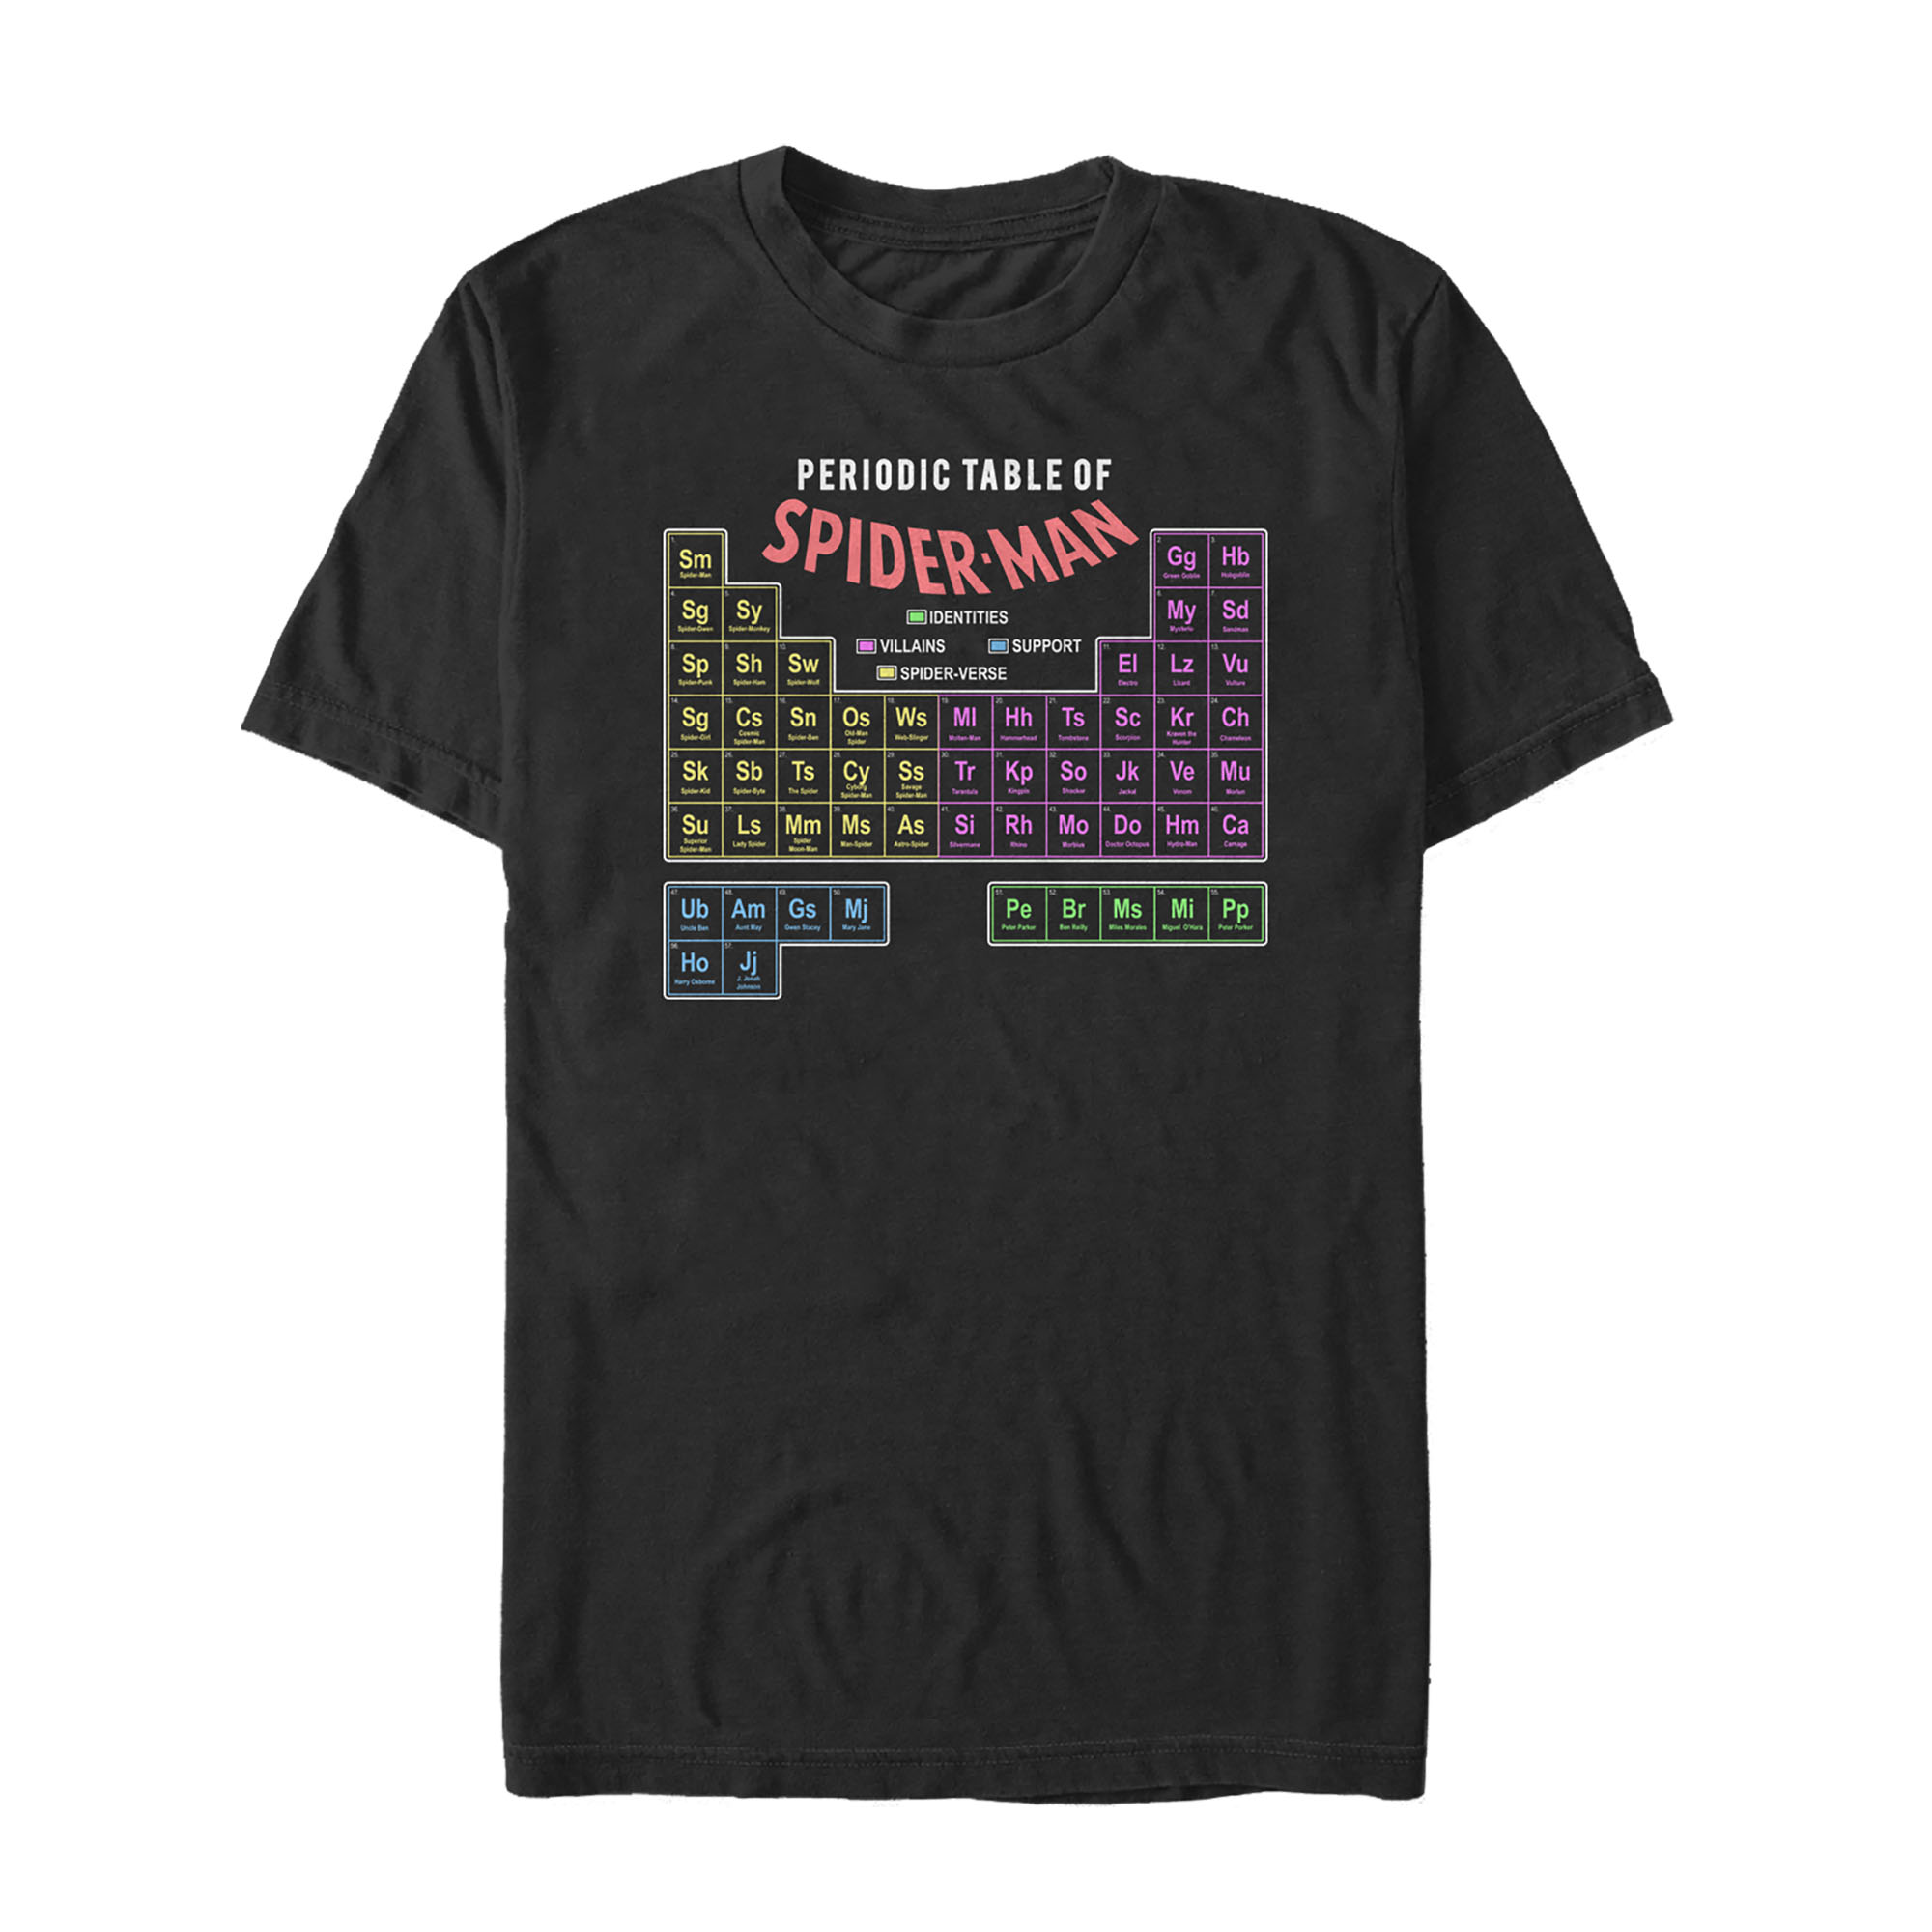 Men's Marvel Spider-Man Periodic Table  Graphic Tee Black X Large - image 1 of 4